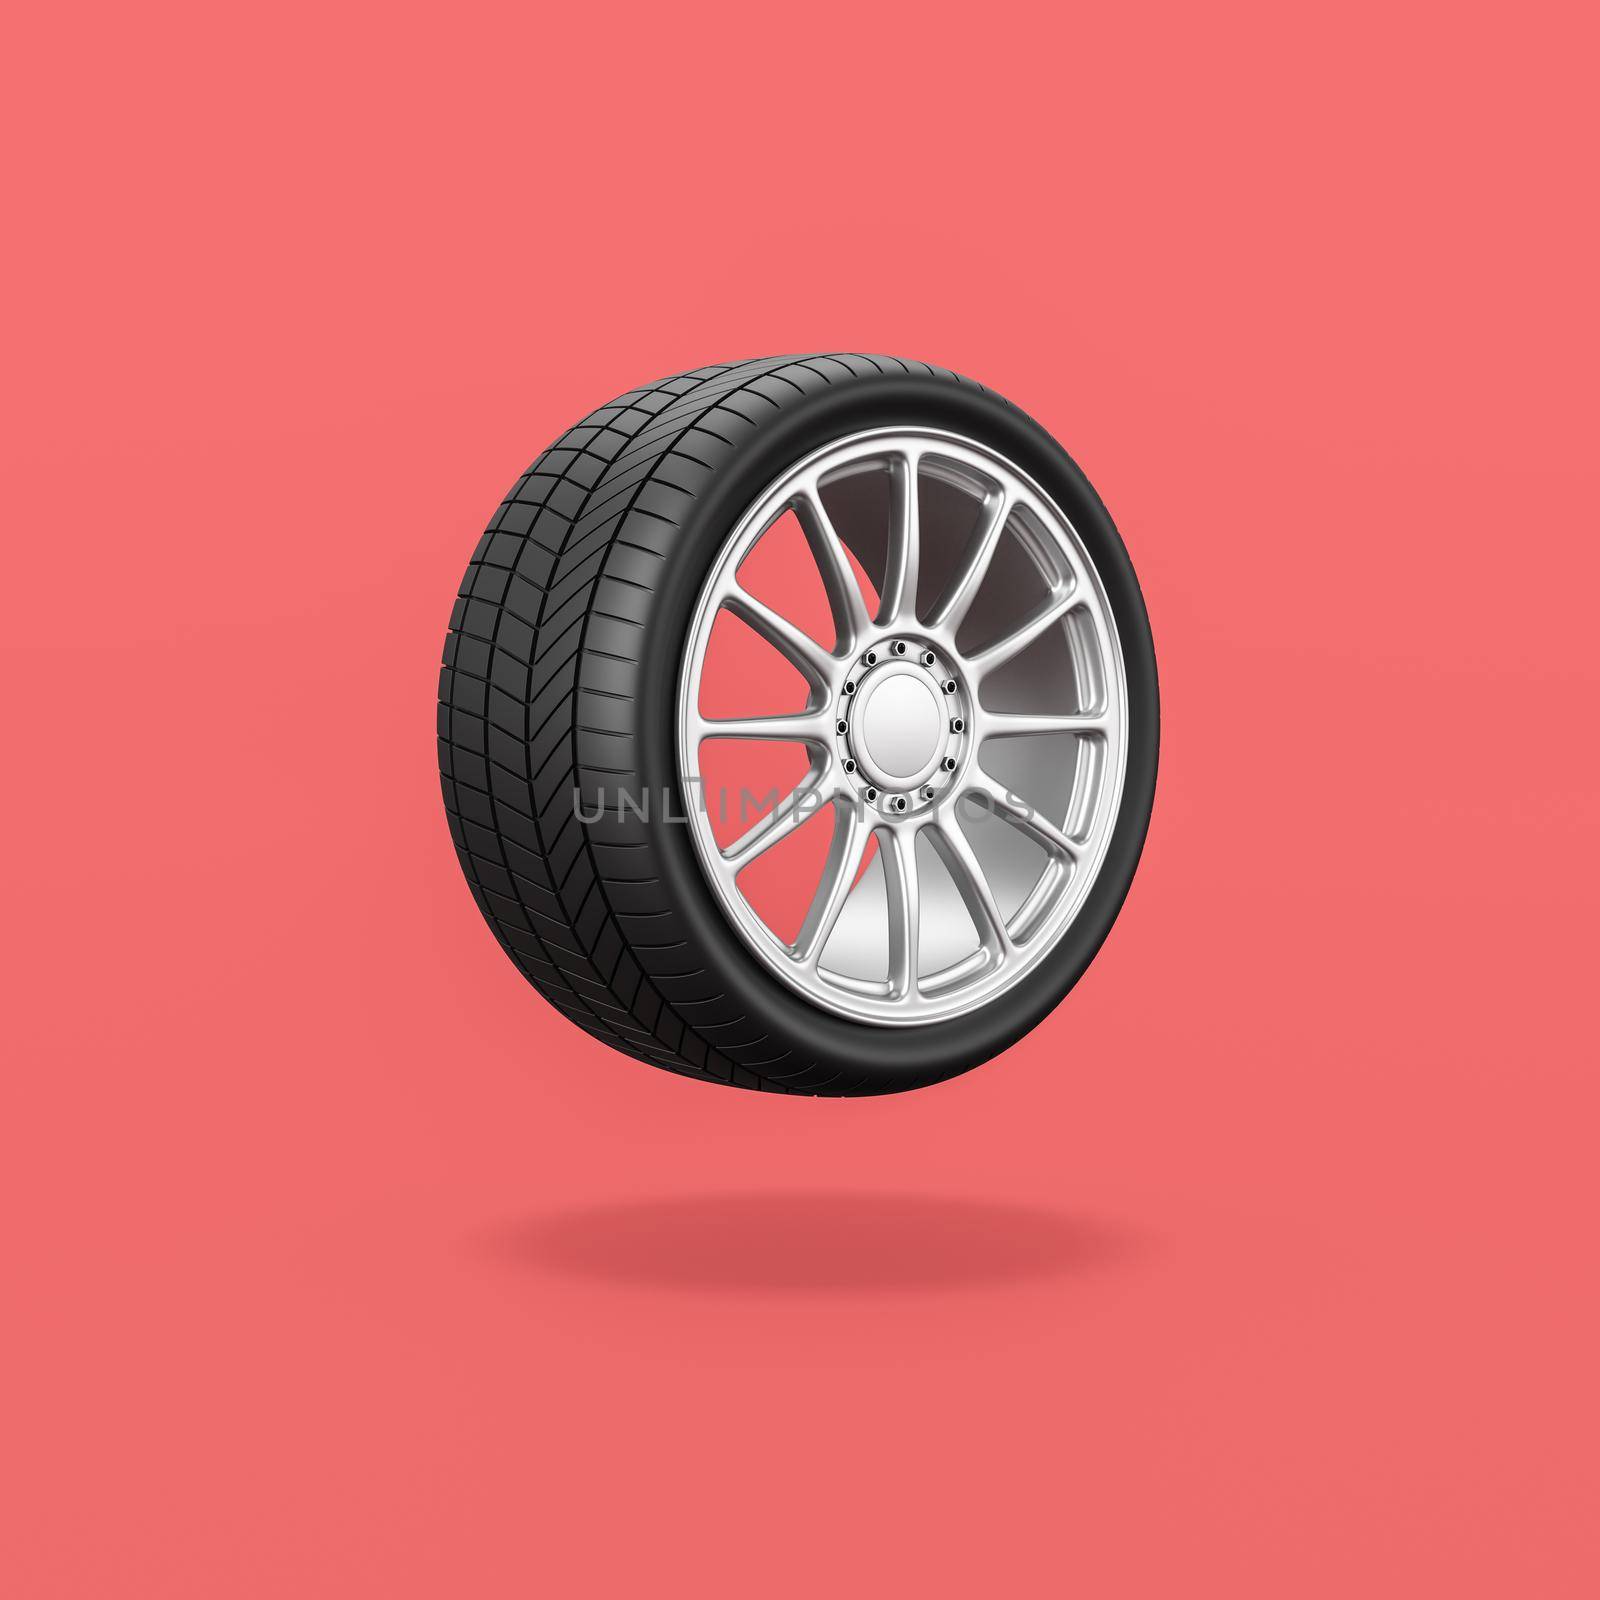 Car Wheel on Red Background by make